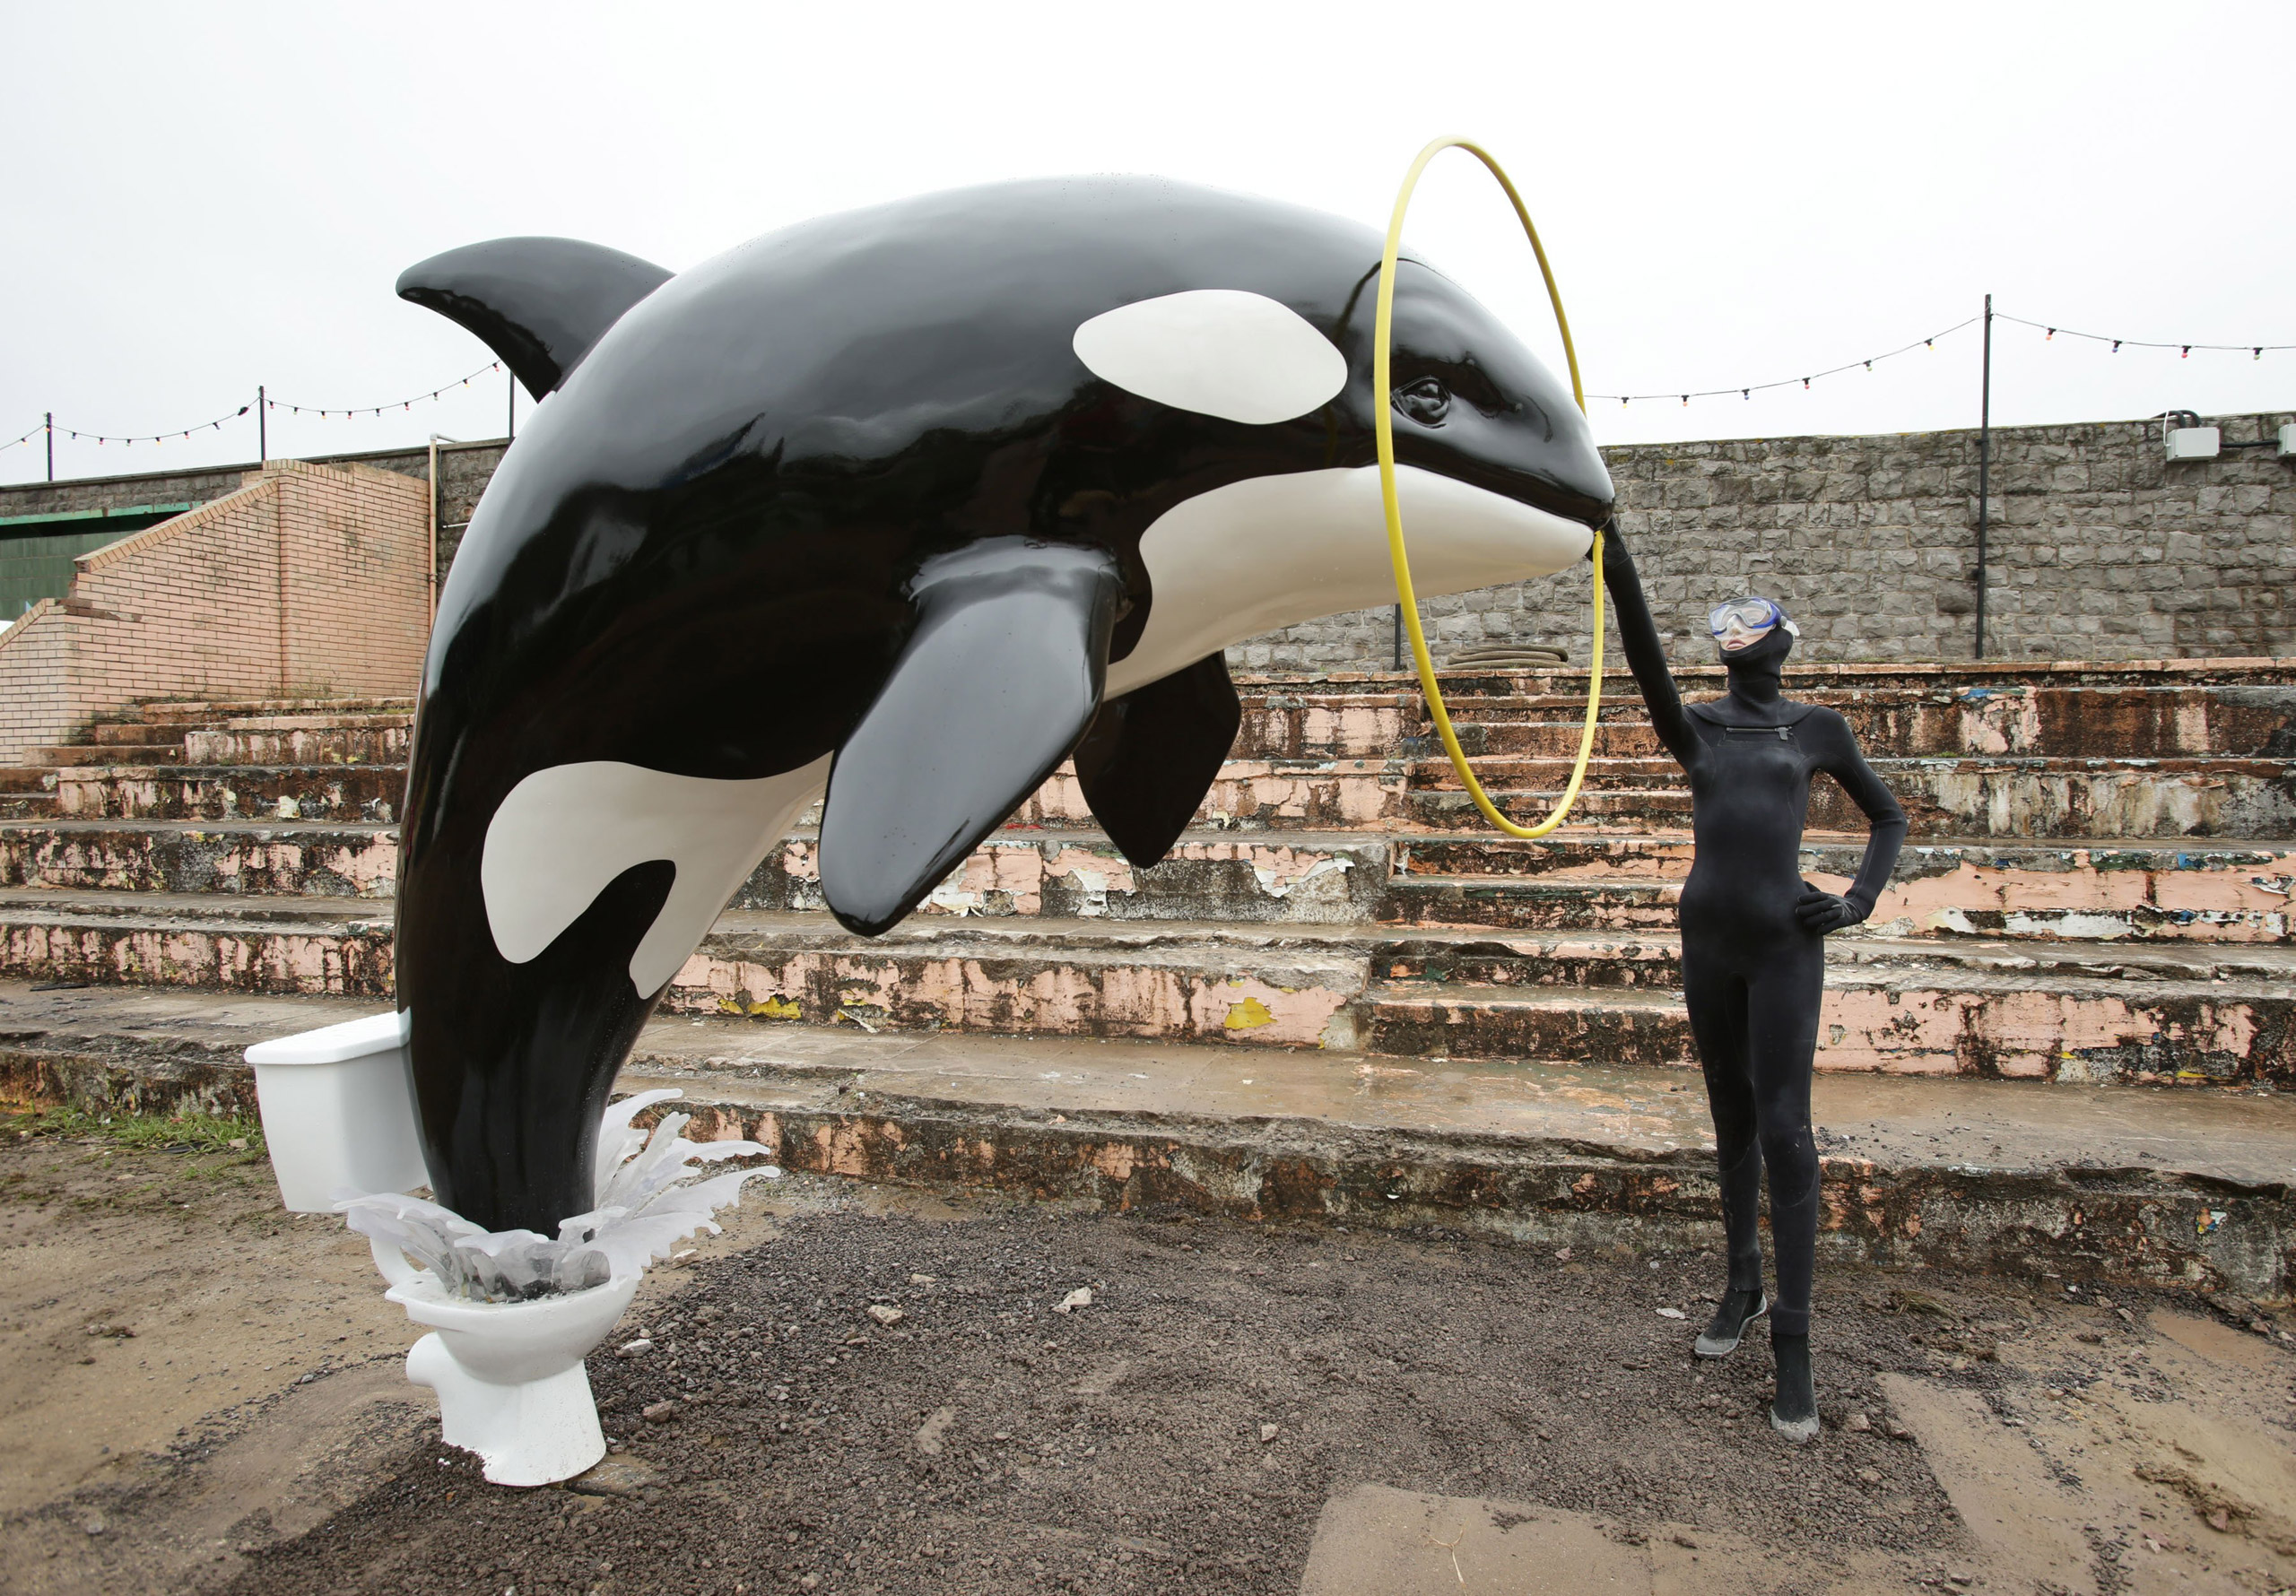 A sculpture of a killer whale jumping out of a toilet by Banksy.